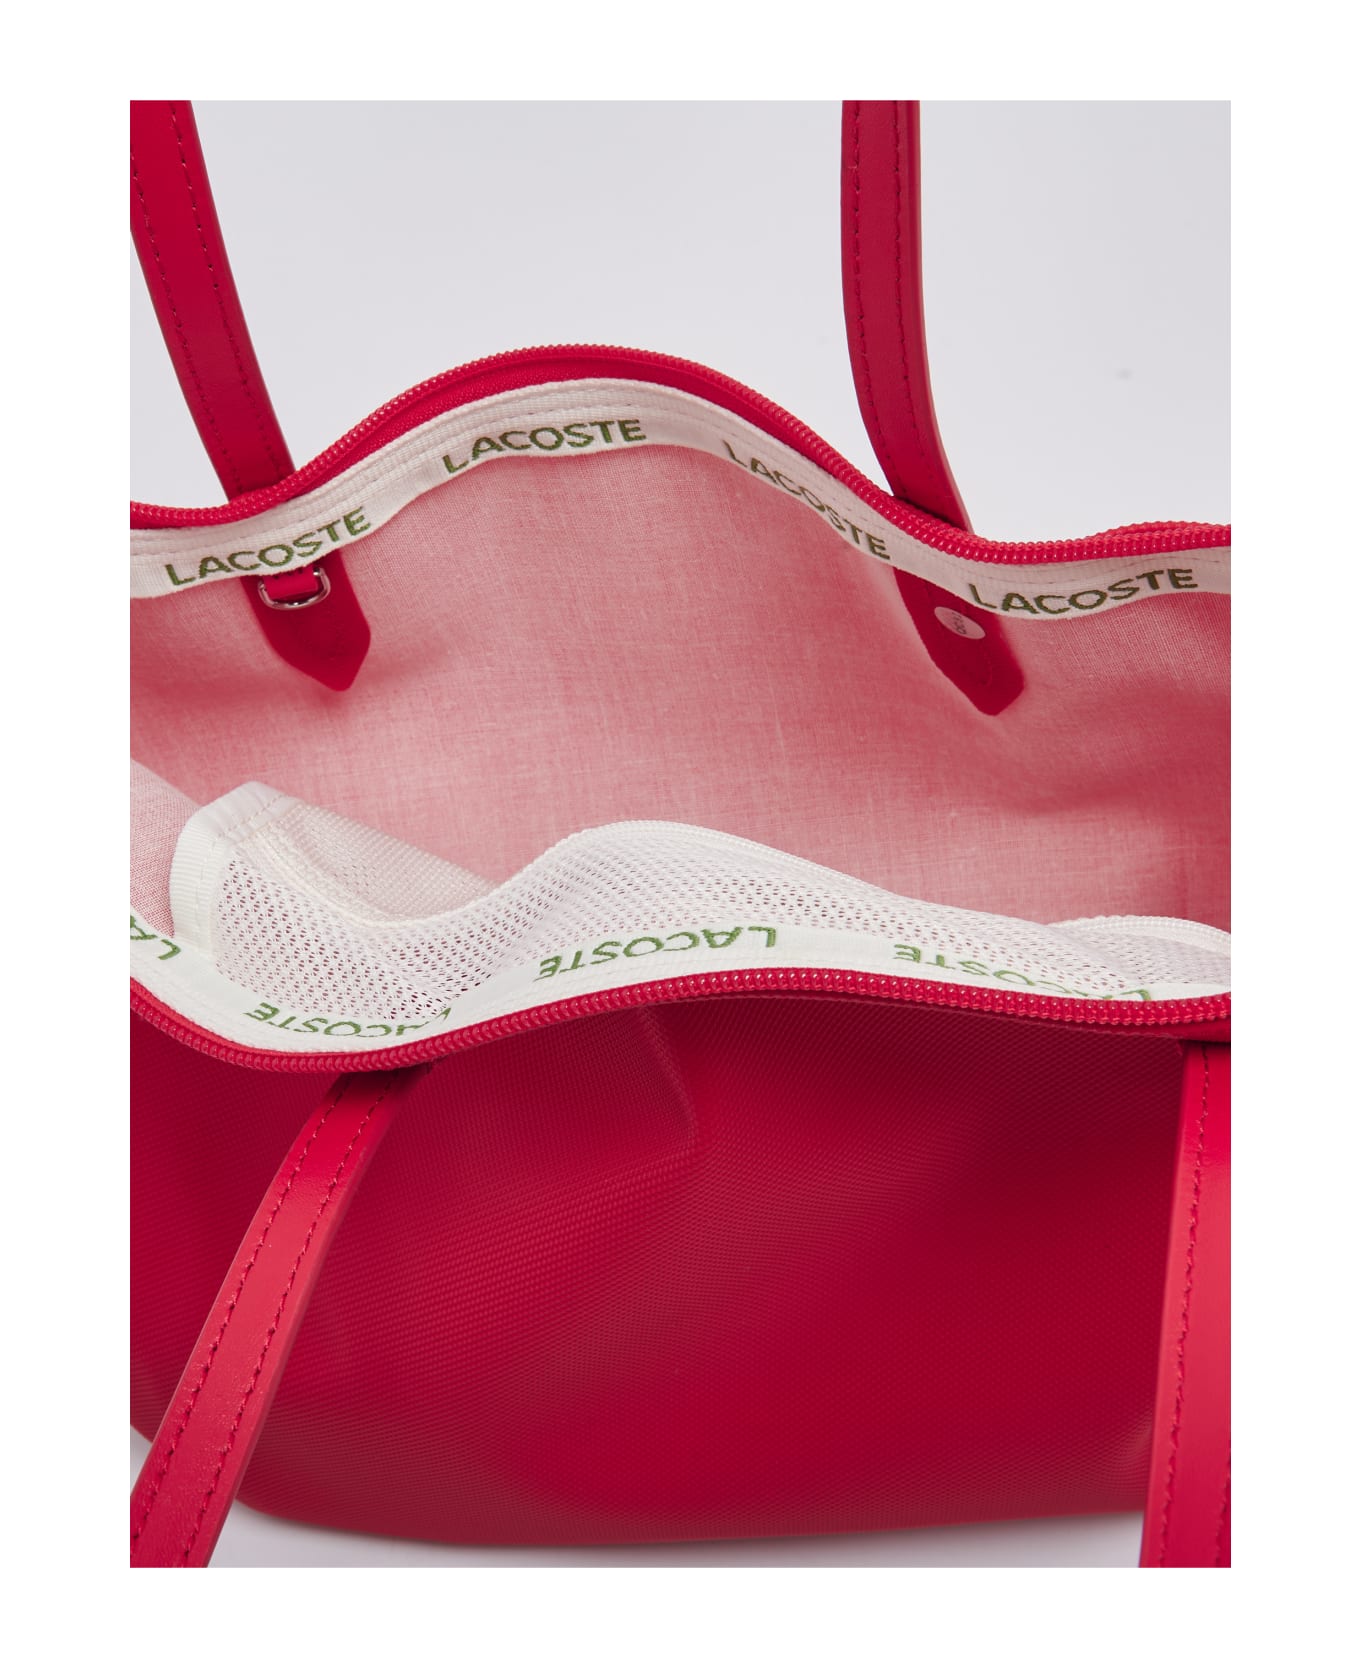 Lacoste Pvc Shopping Bag - ROSSO